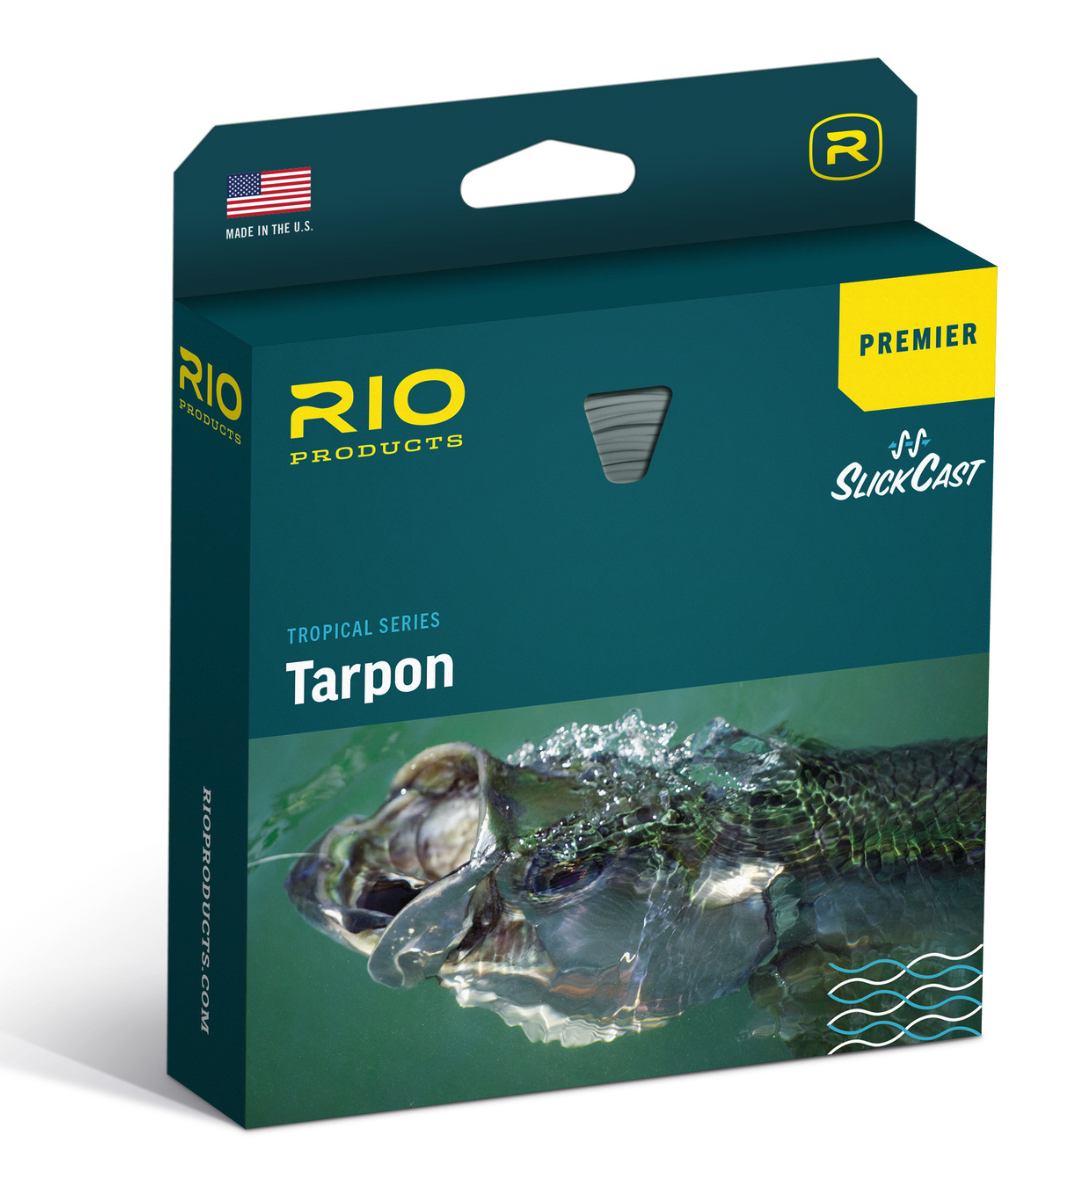 RIO Elite Xtreme Indicator Fly Line – Fly Fish Food